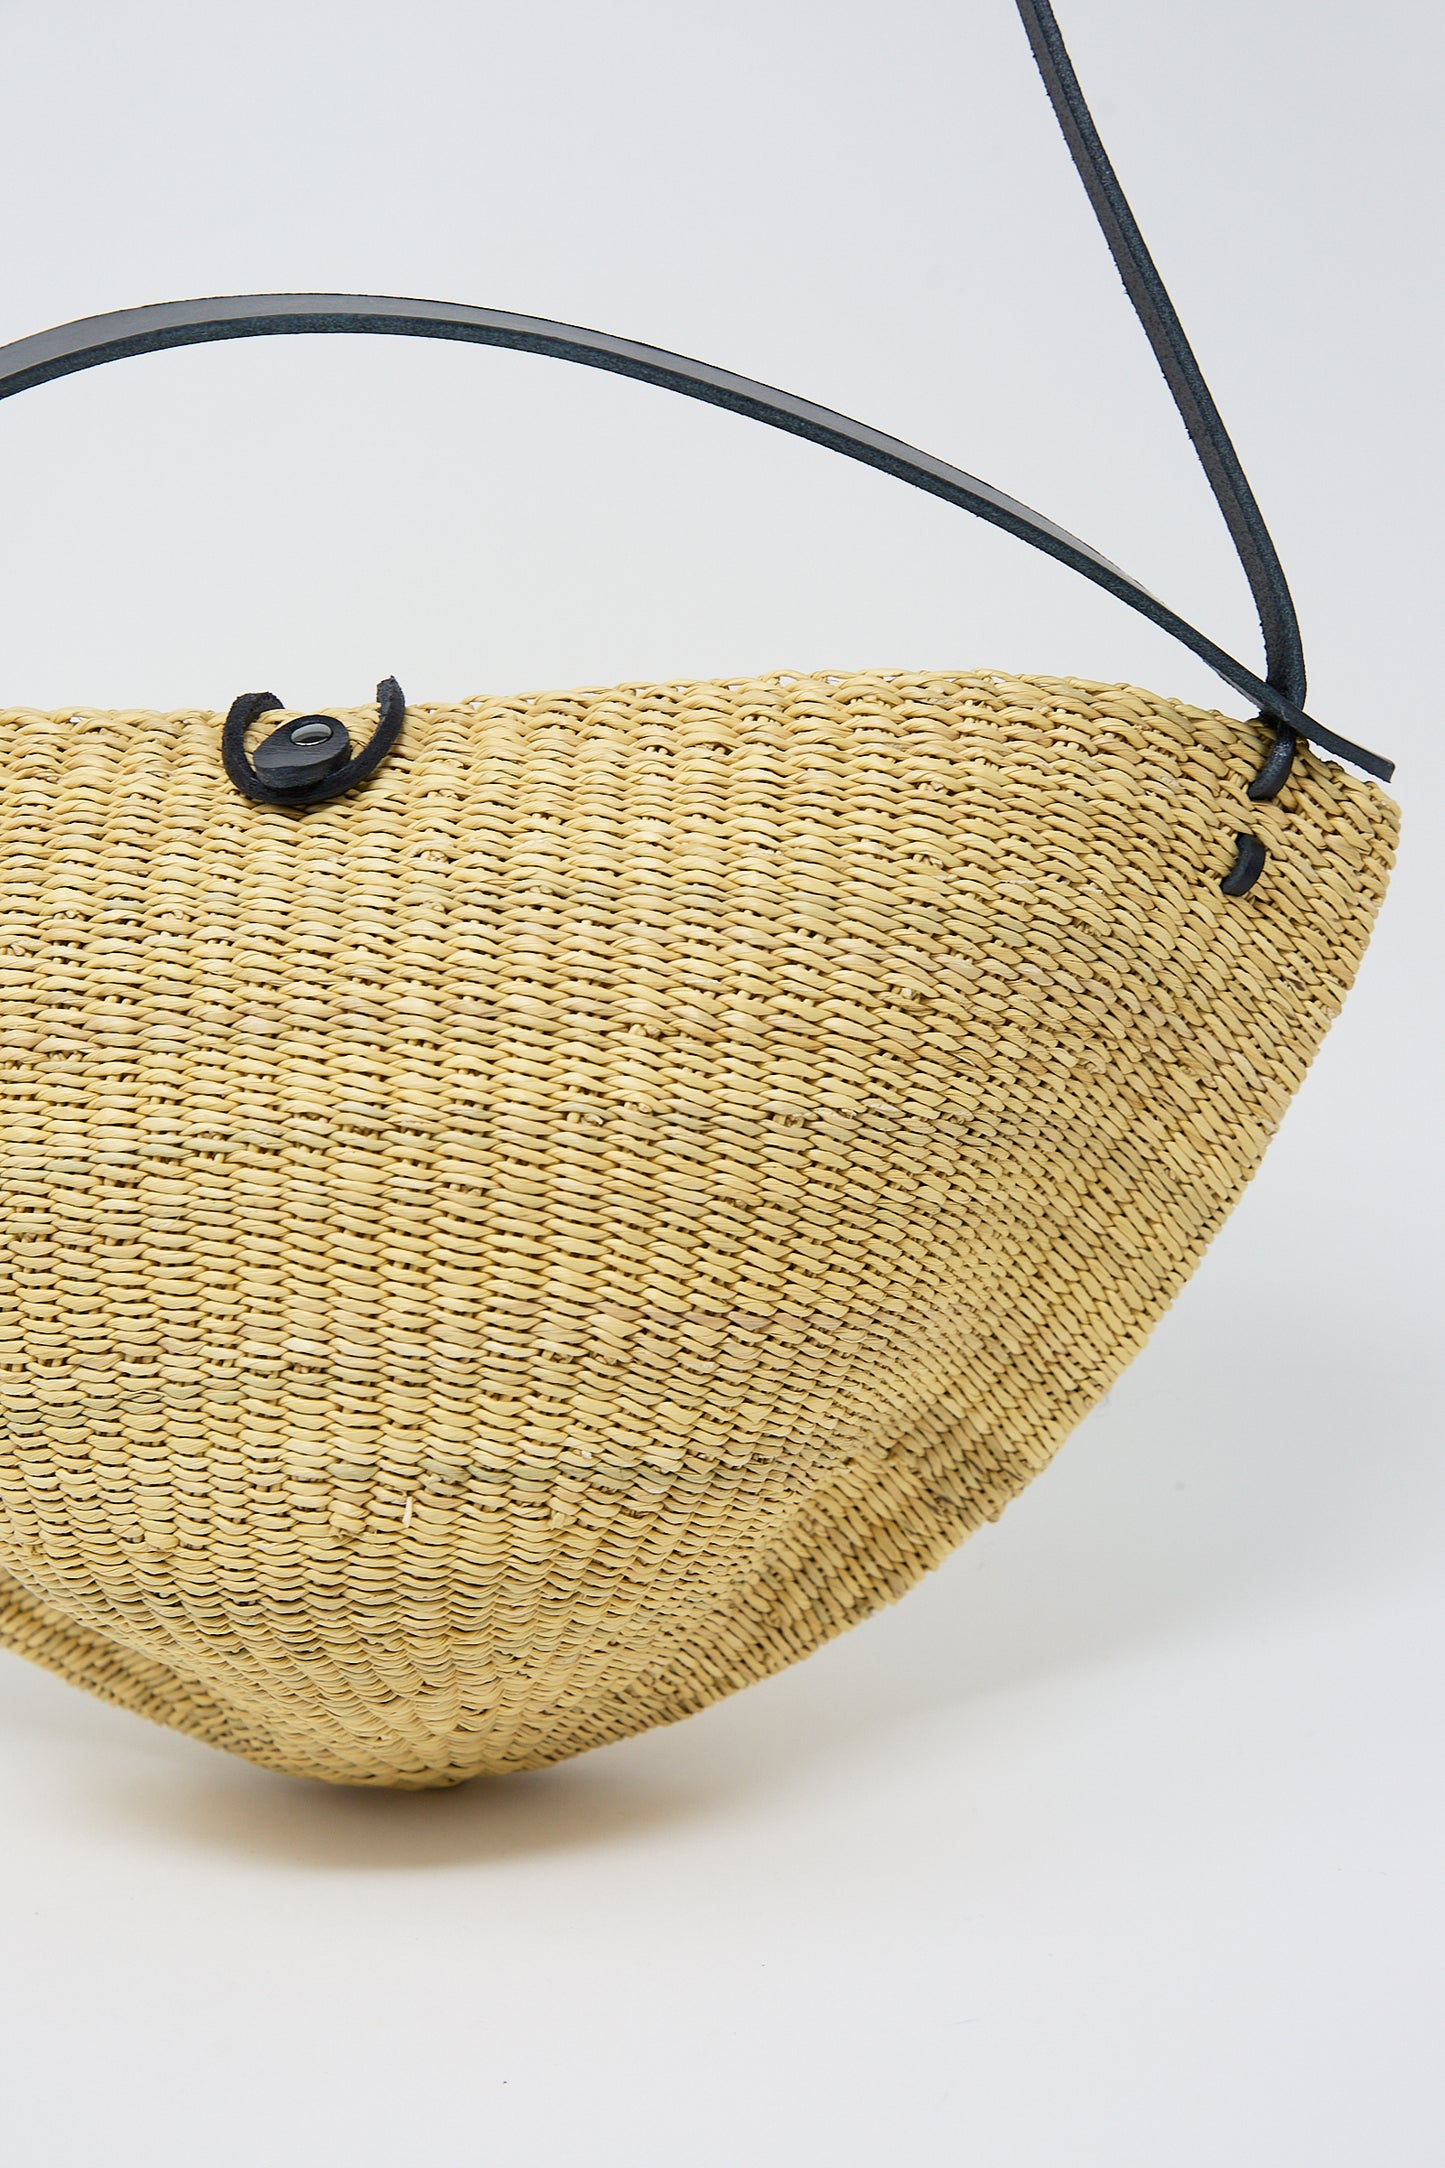 Woven yellow half-moon shaped handbag made from elephant grass with a black strap. 
Product Name: N. 33 Medium Walnut Bag in Natural 
Brand Name: Inès Bressand